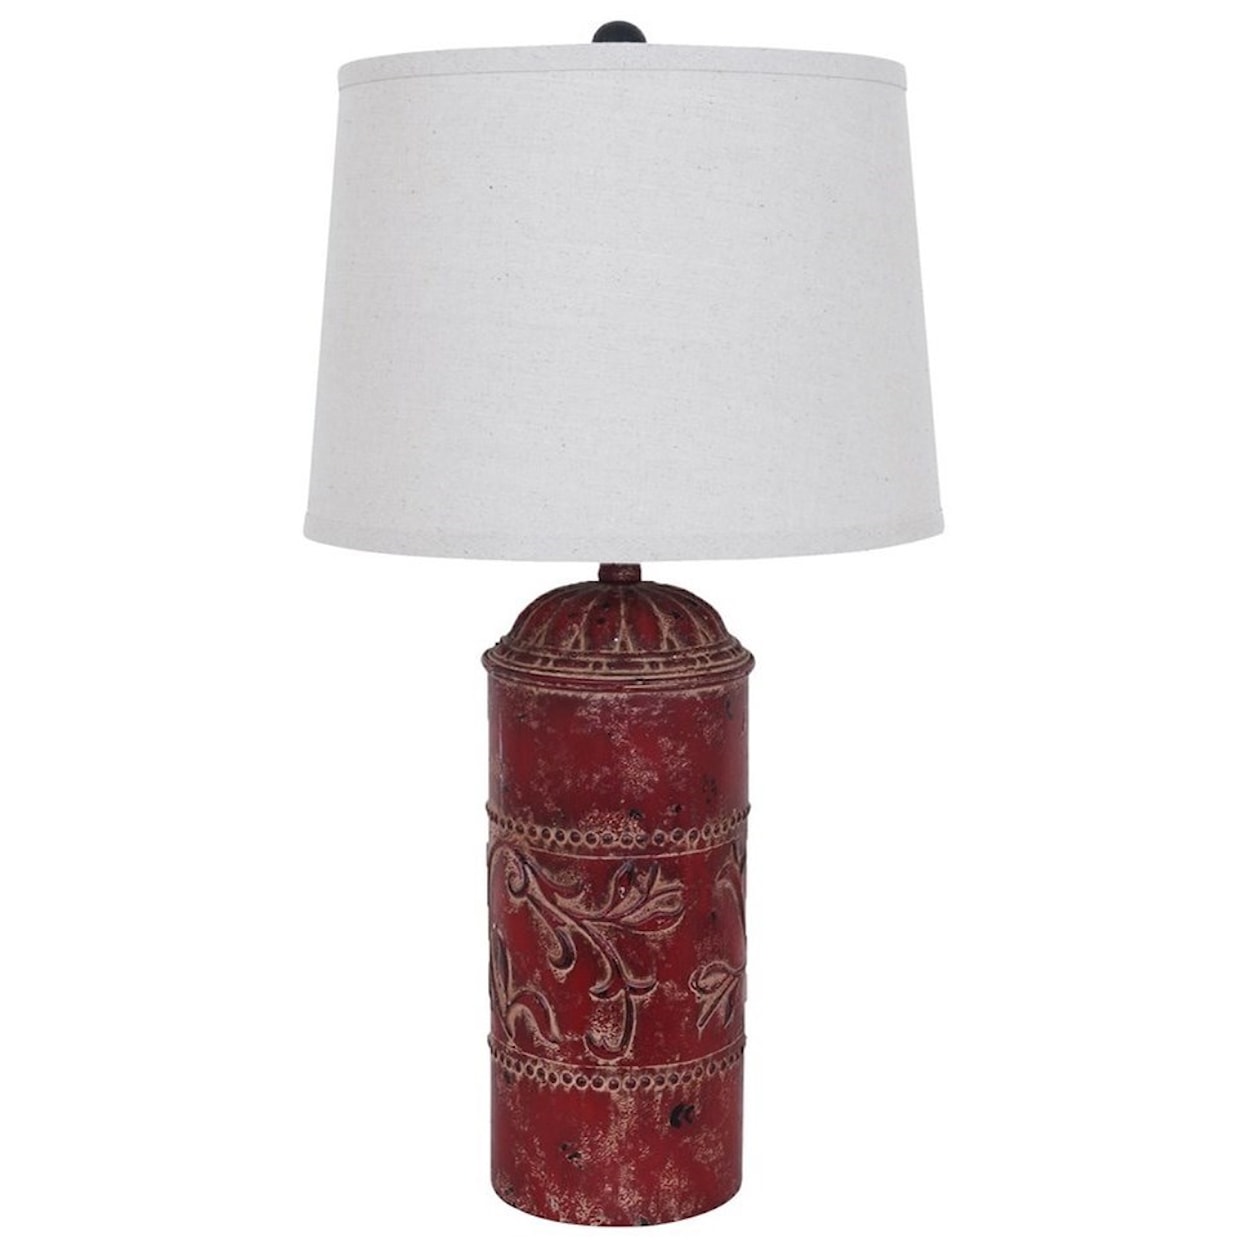 Crestview Collection Lighting Country Store Table Lamp